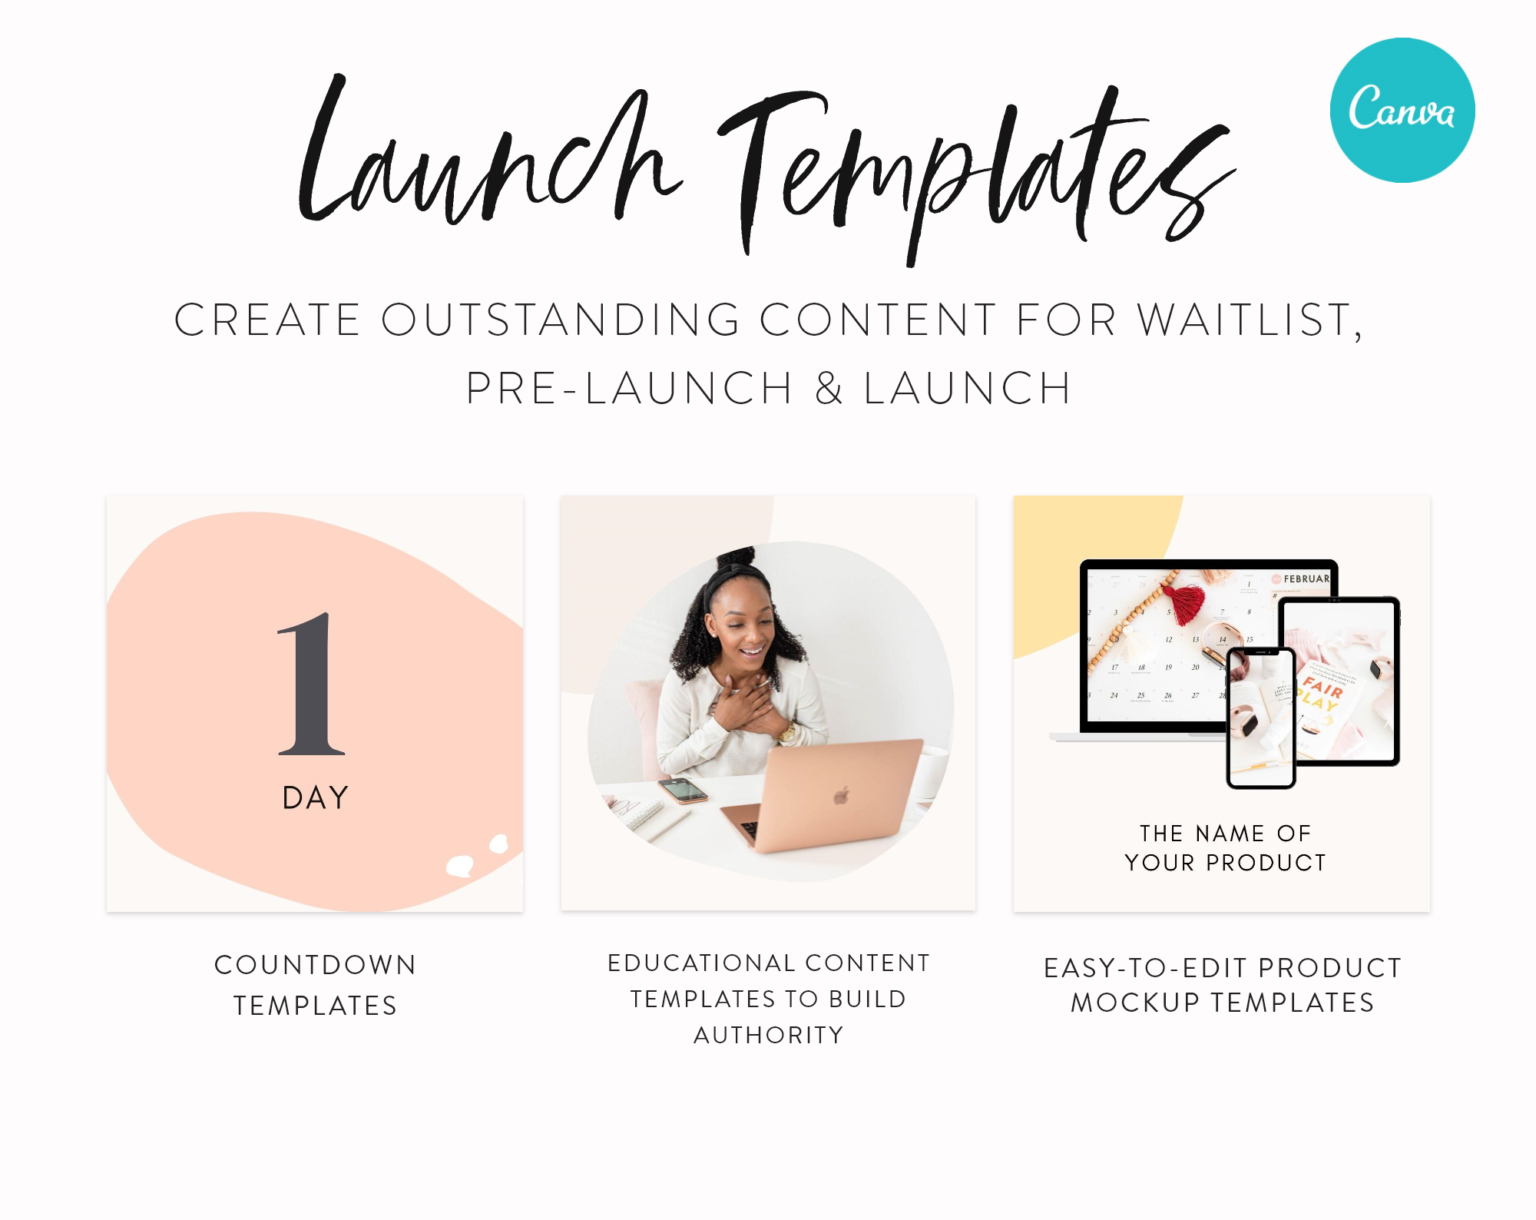 launch-Instagram-puzzle-for-canva-templates-beautiful-feed-grid